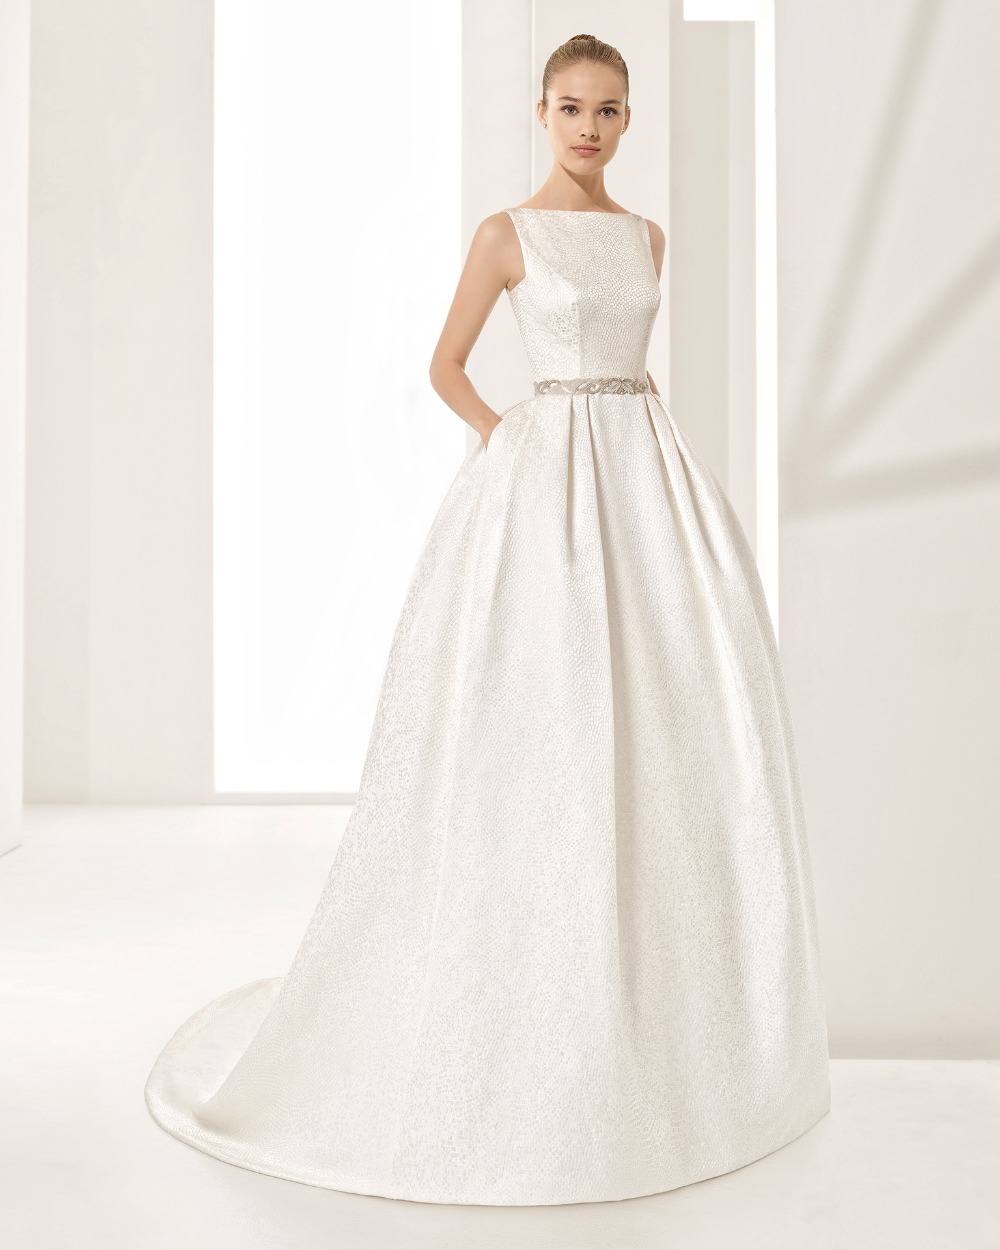 Elegant and Timeless Couture Wedding Dress Collection By Rosa Clará